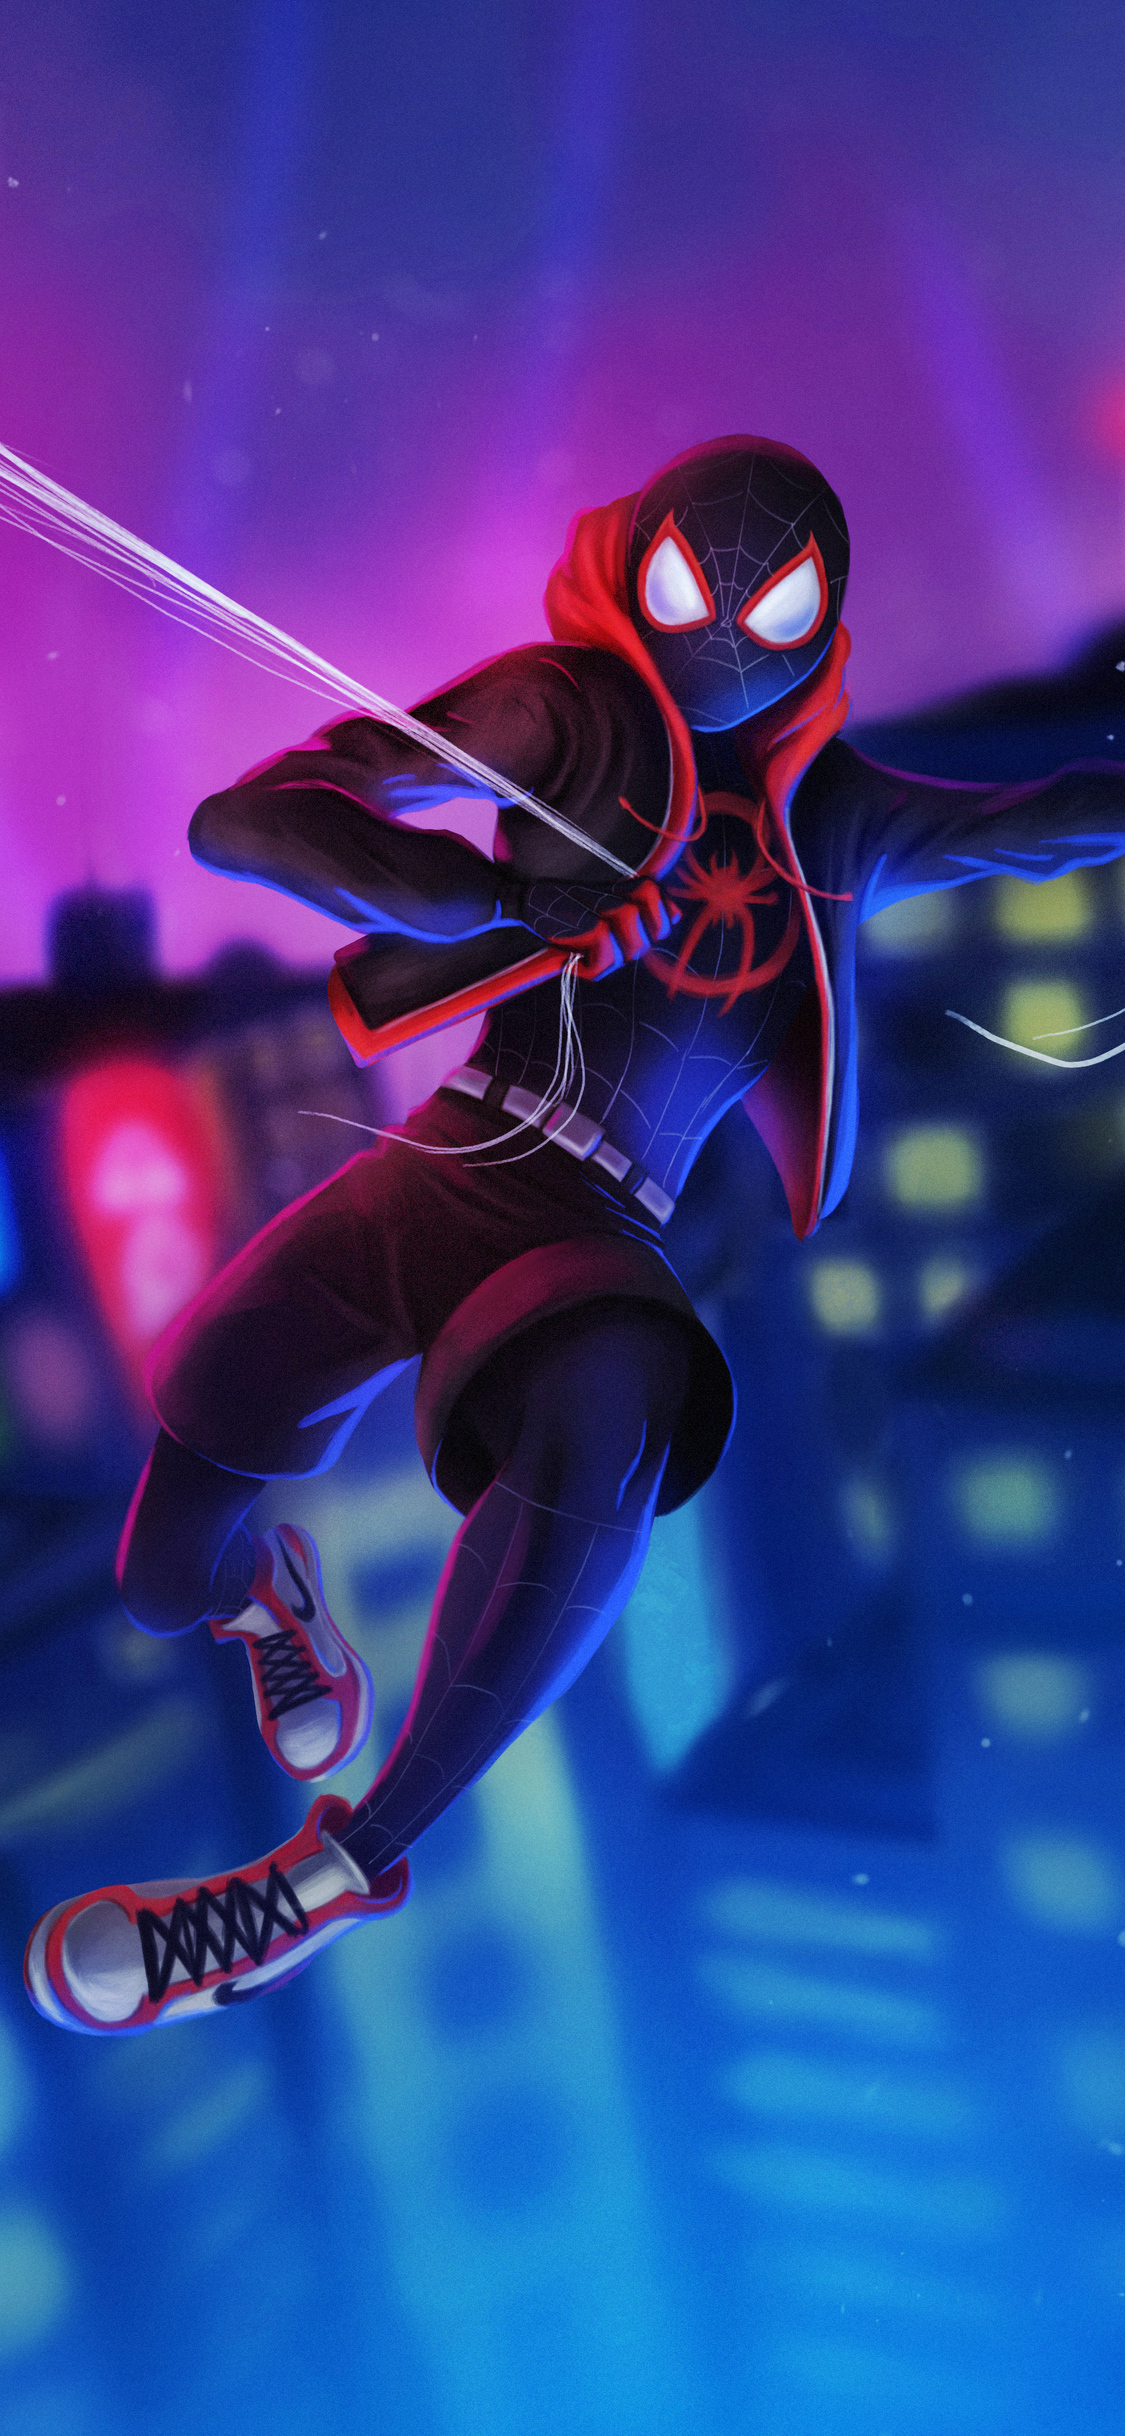 Free download Spiderman 4k Iphone Wallpapers Miles Morales Wallpaper Iphone  X [1125x2436] for your Desktop, Mobile & Tablet | Explore 30+ Spider Man 4k  iPhone Wallpapers | Spider Man 2099 Wallpaper, Spider